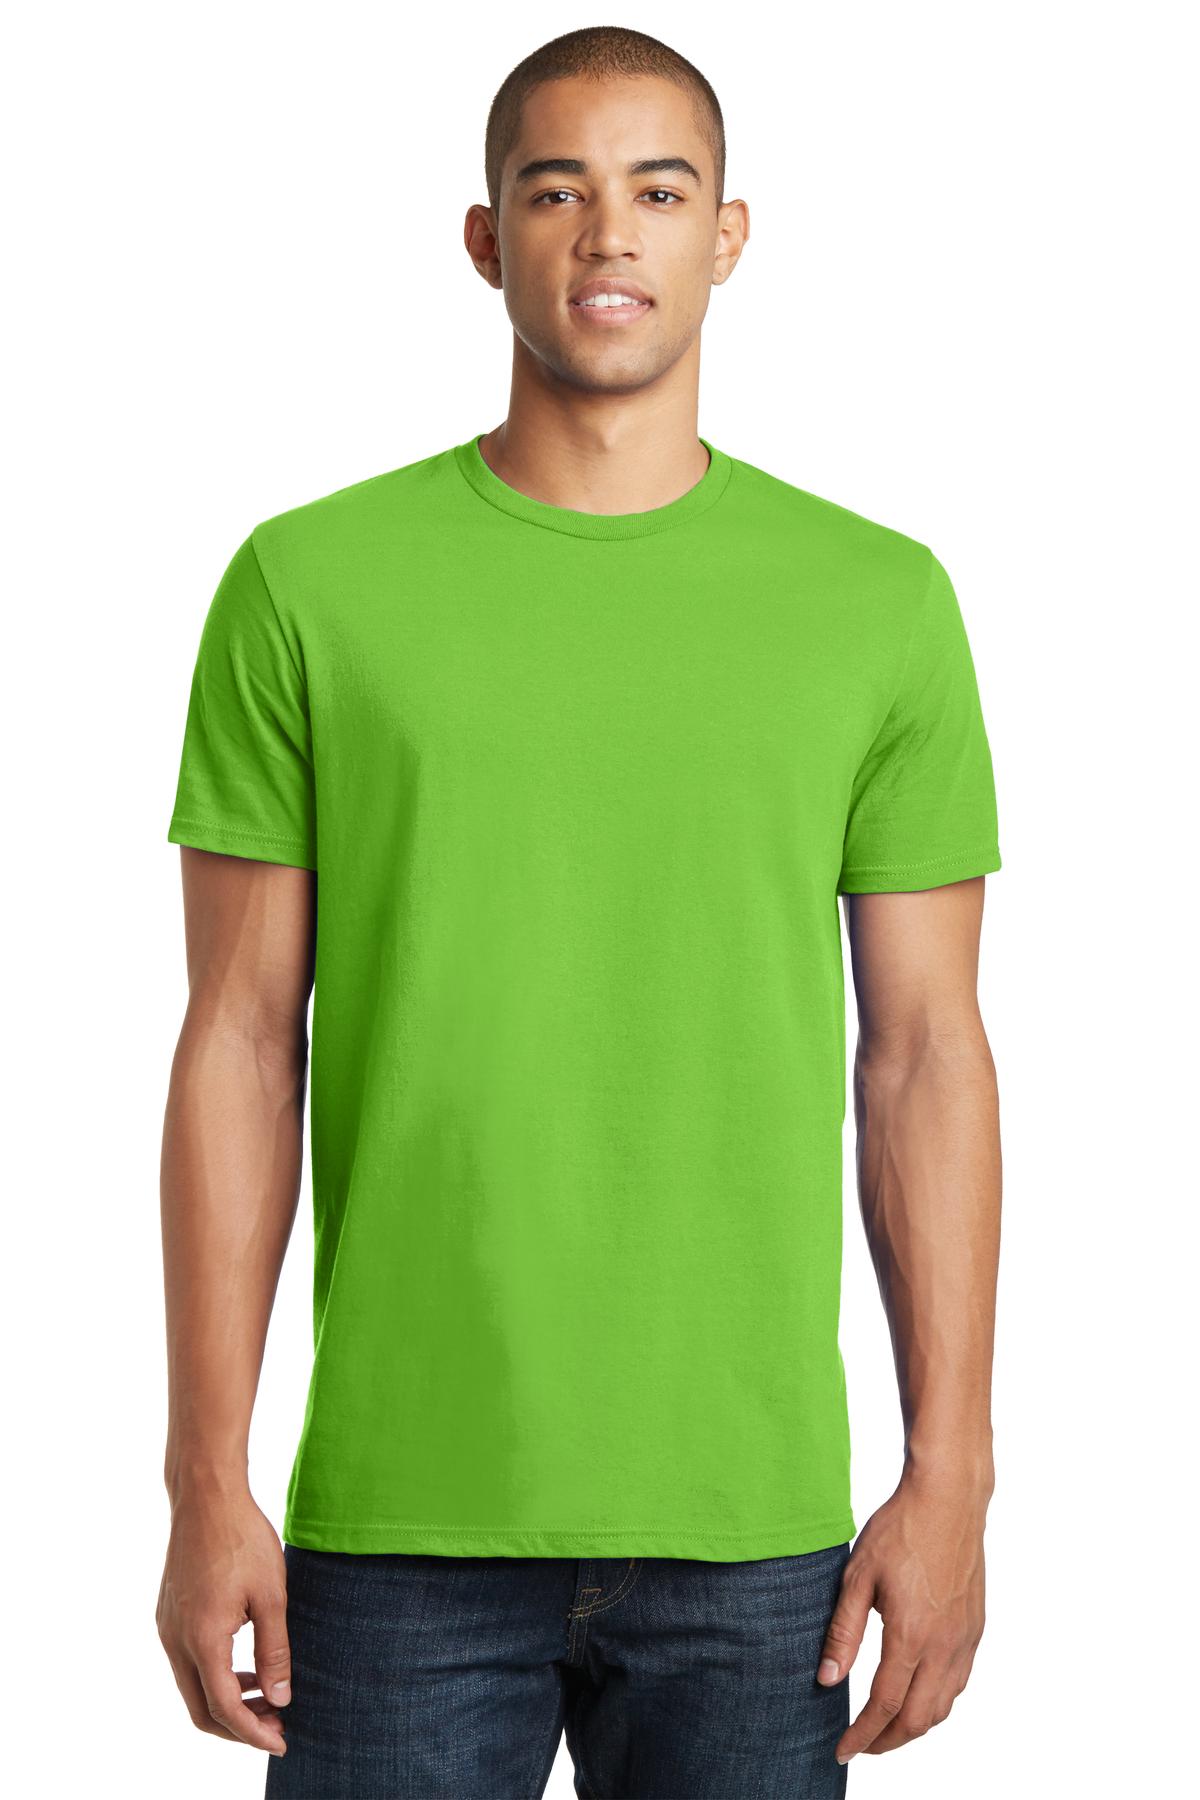 District Threads Young Mens Concert Tee. Neon Green. L. - image 1 of 4